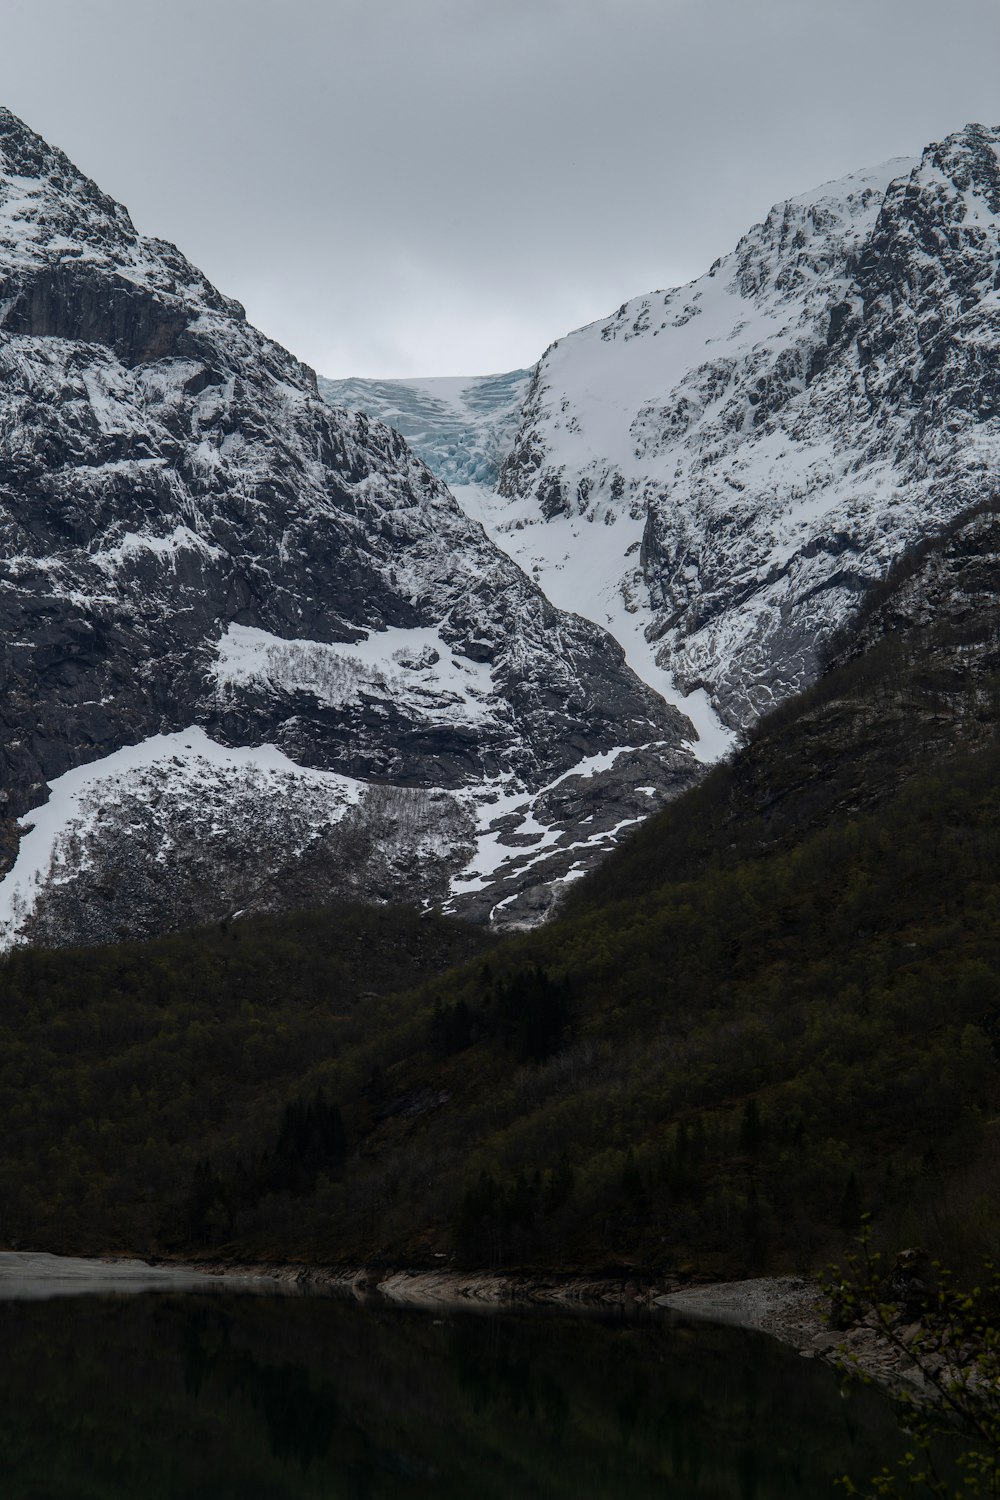 a mountain range covered in snow next to a body of water